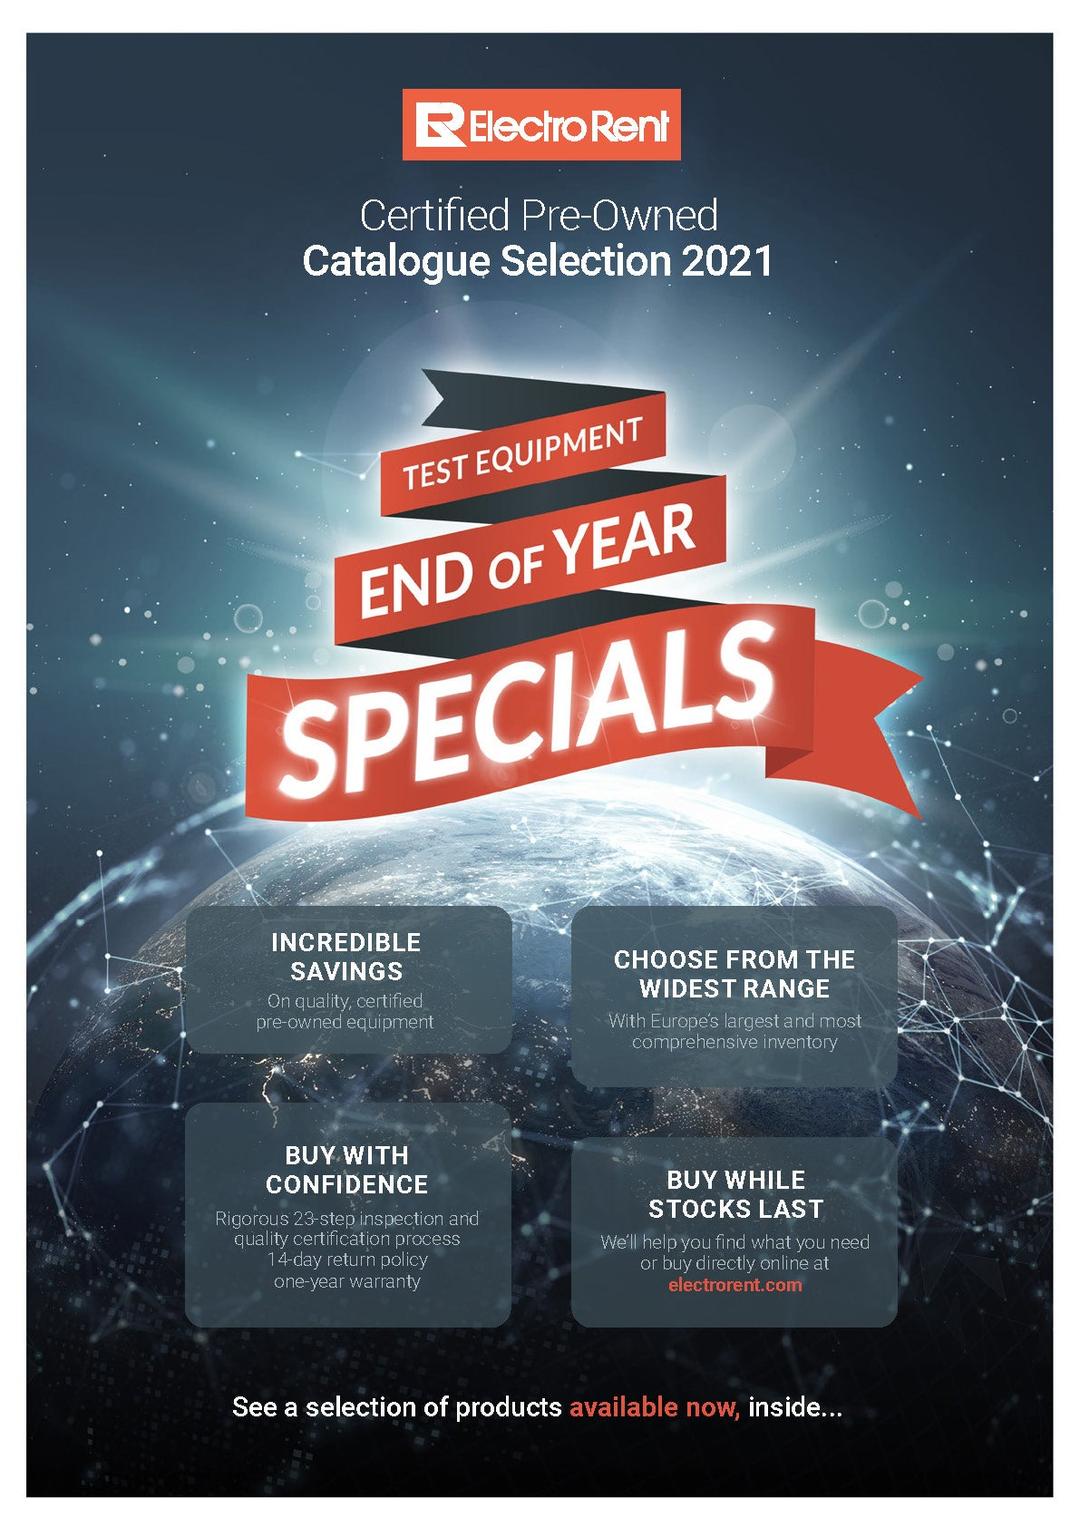 Certified Pre-Owned Catalogue 2021, bild